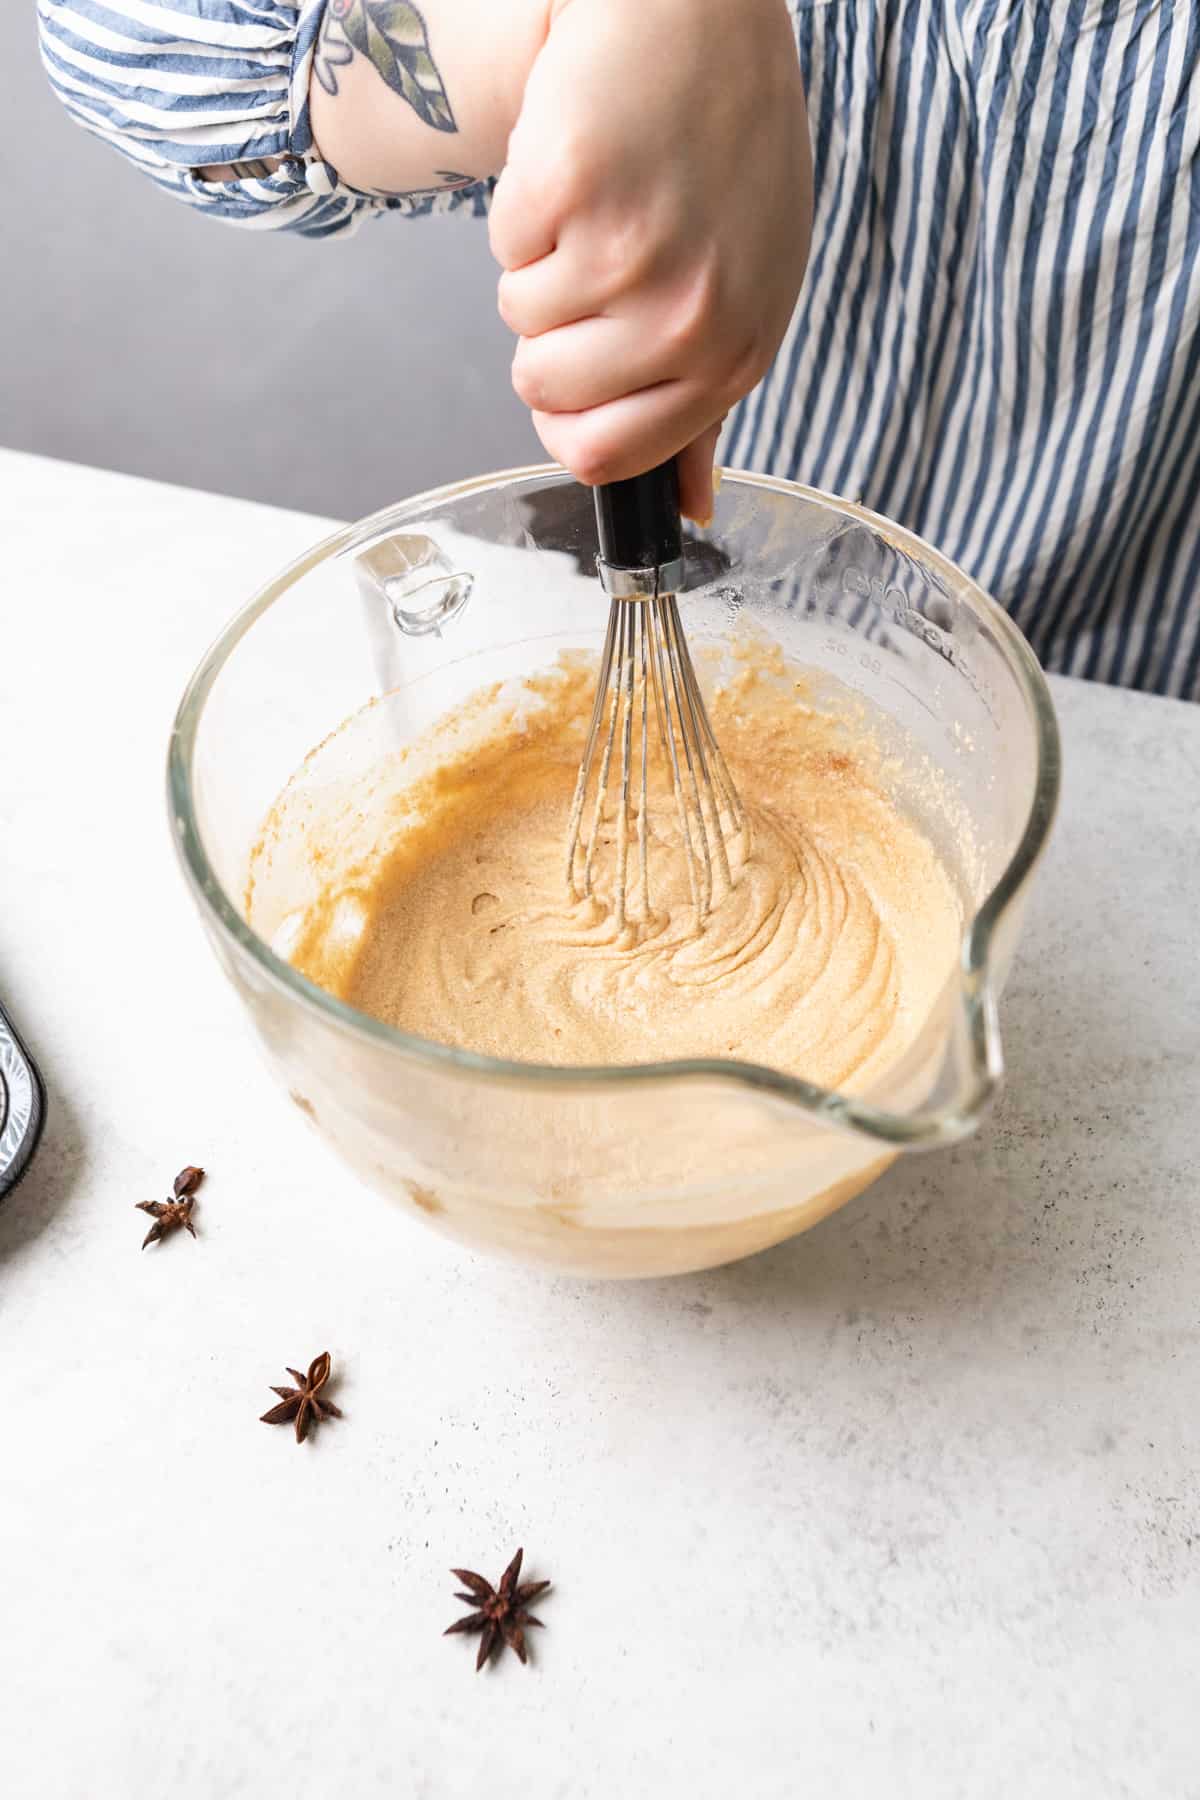 A person mixing cupcake batter with a whisk in a large glass bowl.